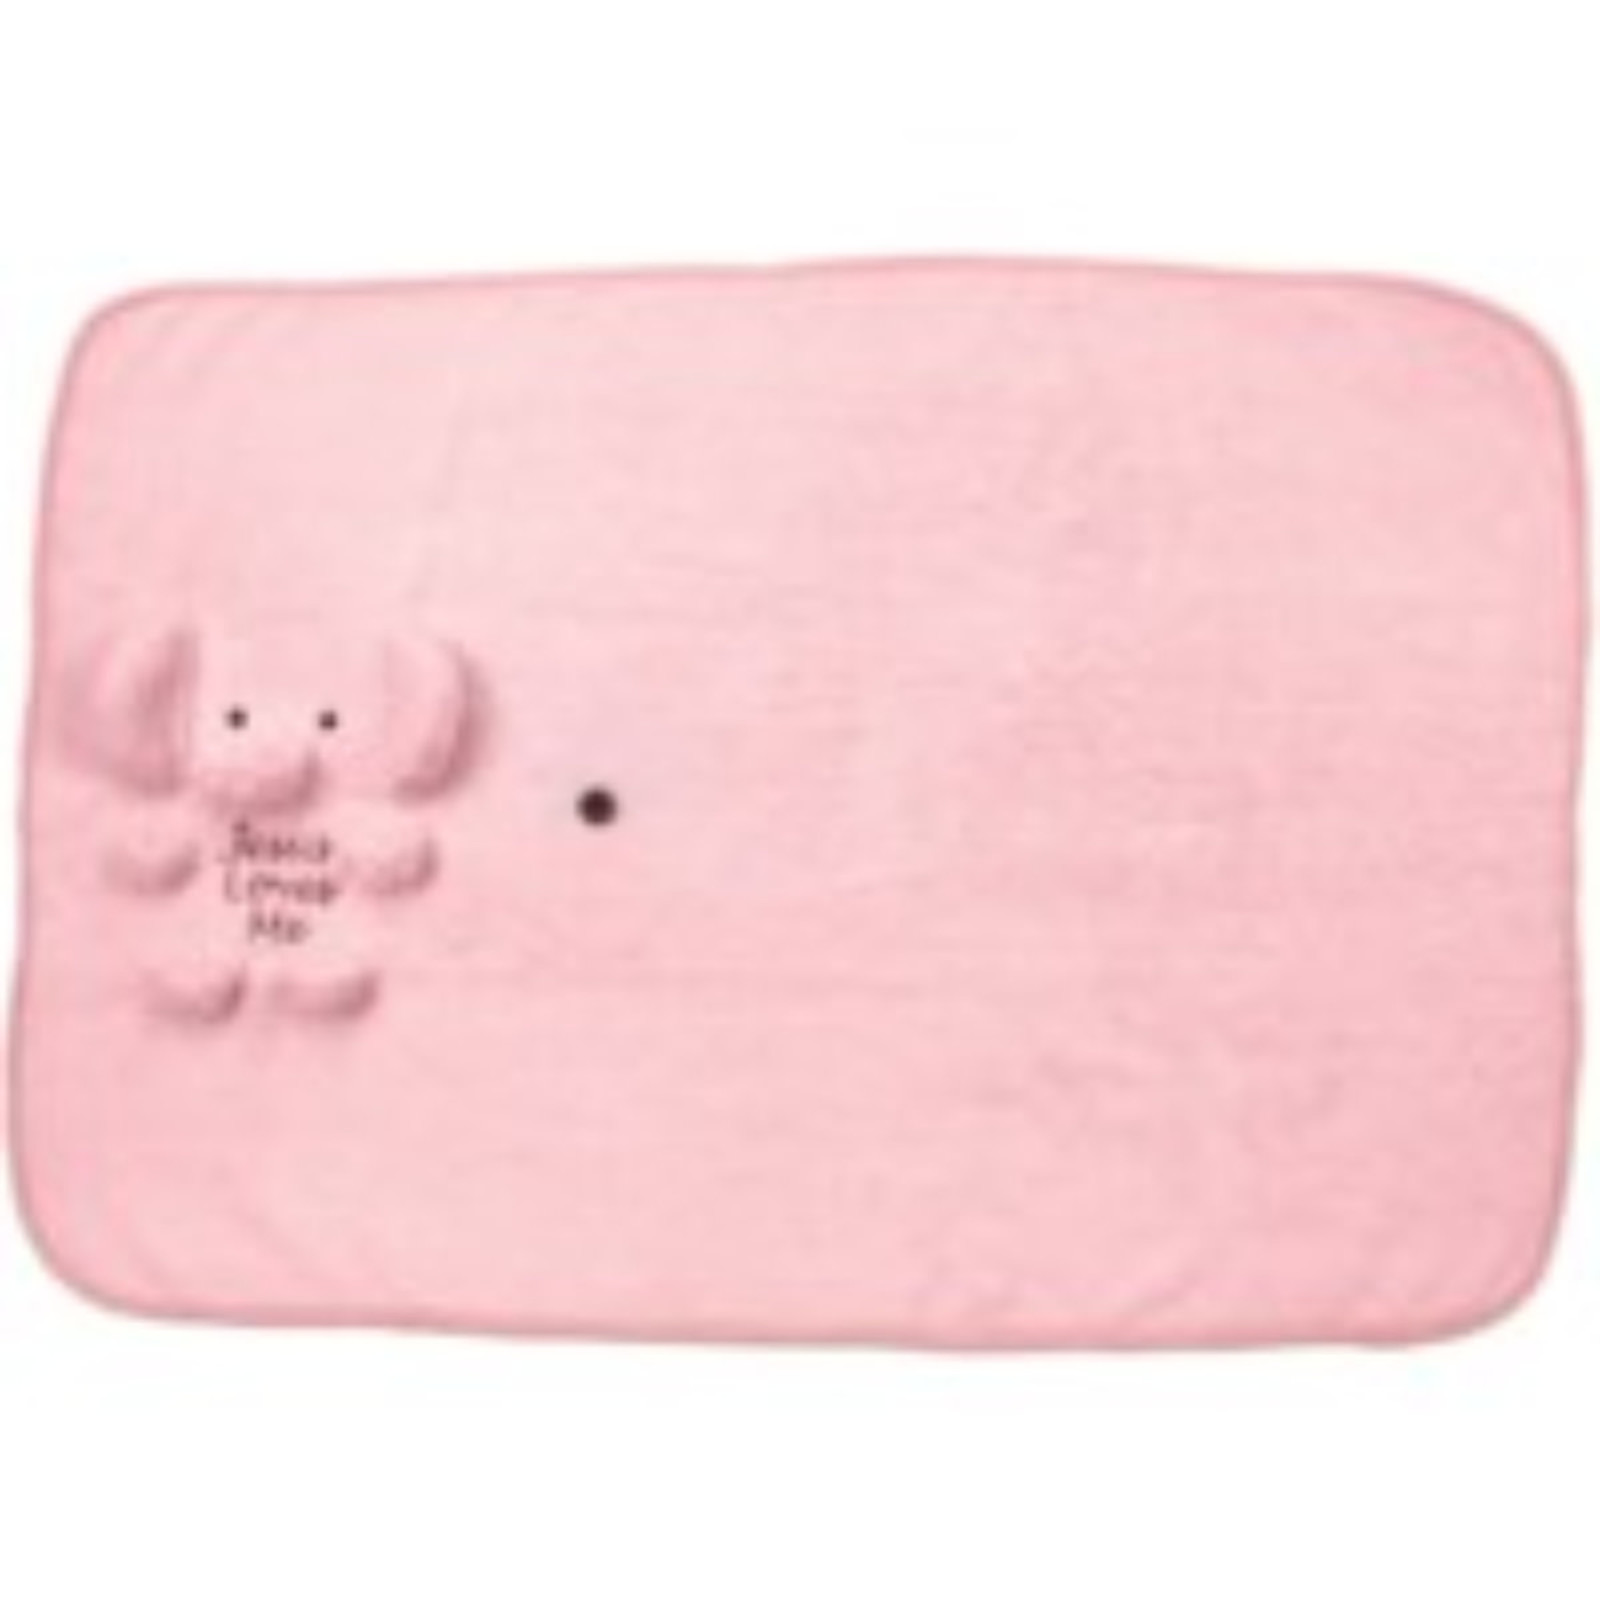 Brownlow Gifts Elephant Blankie-Pink loading=